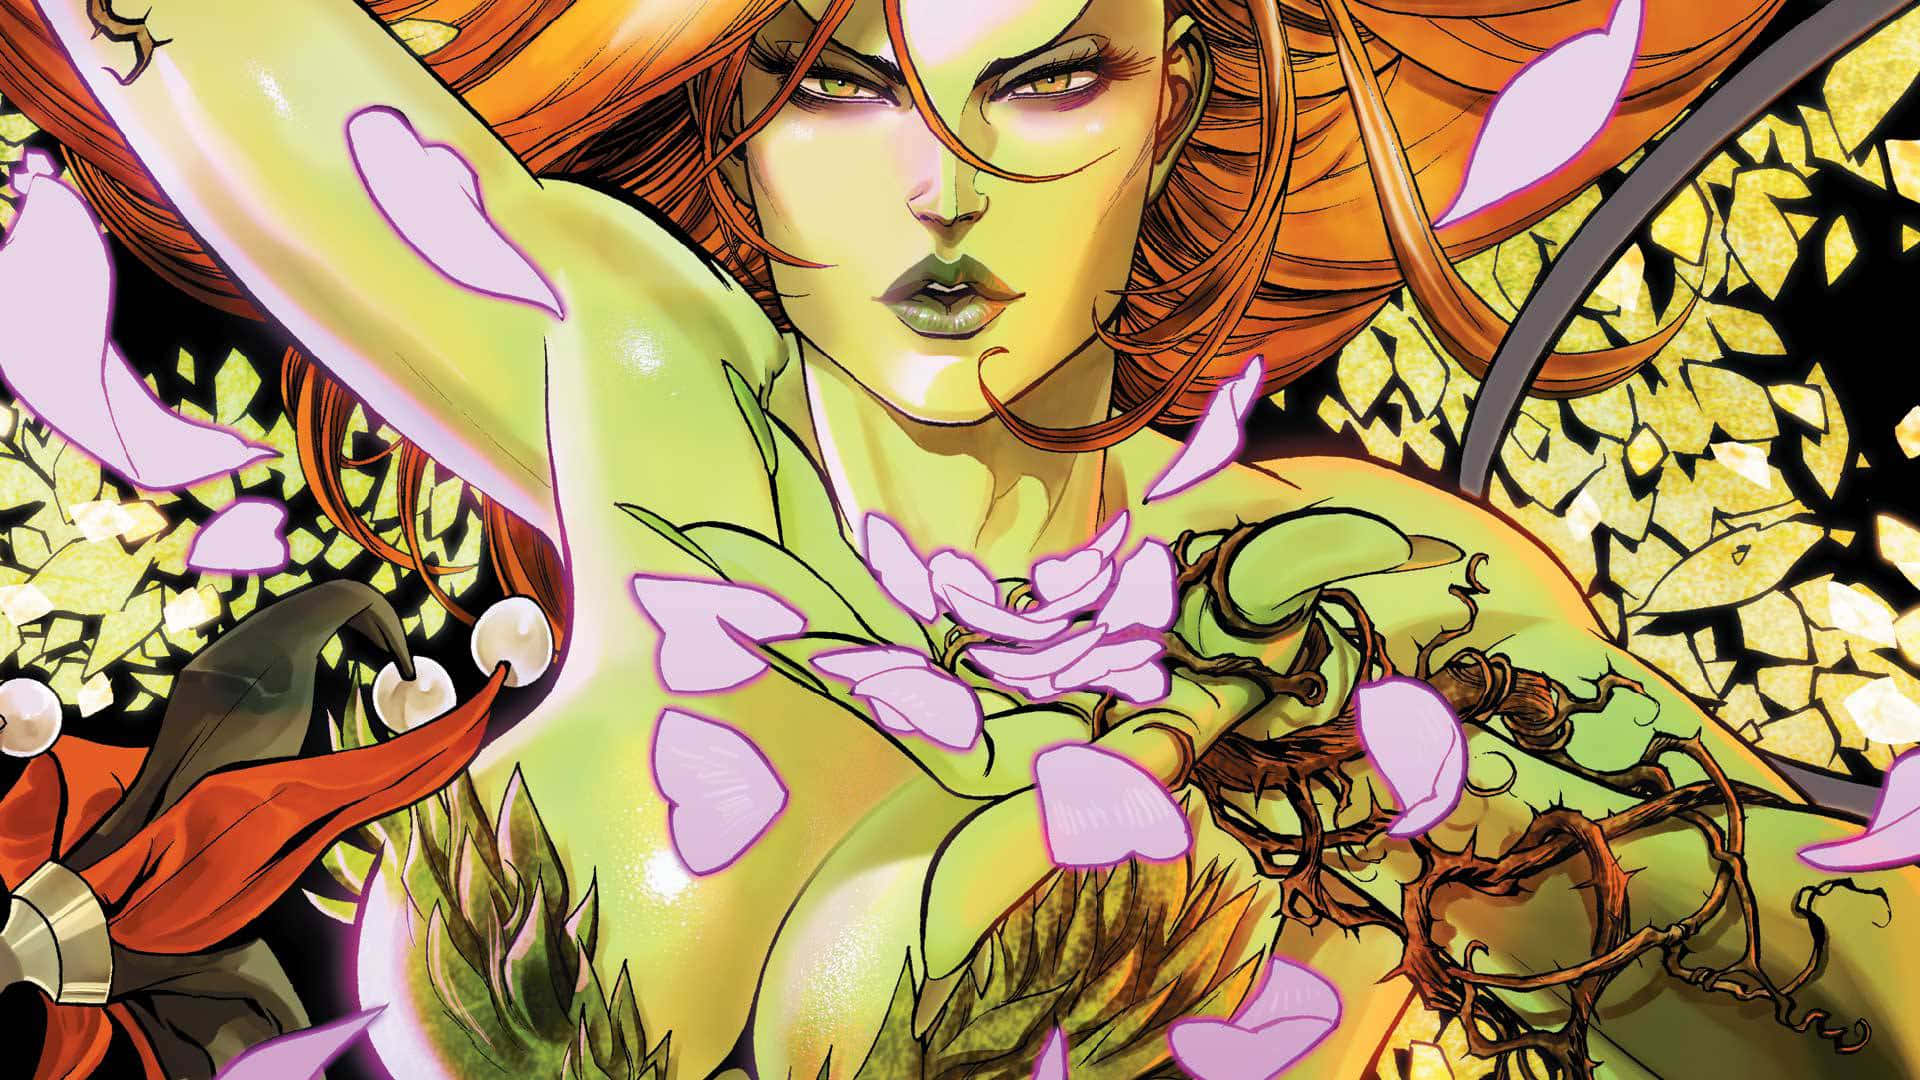 A Comic Book Cover Featuring A Woman With Red Hair And Flowers